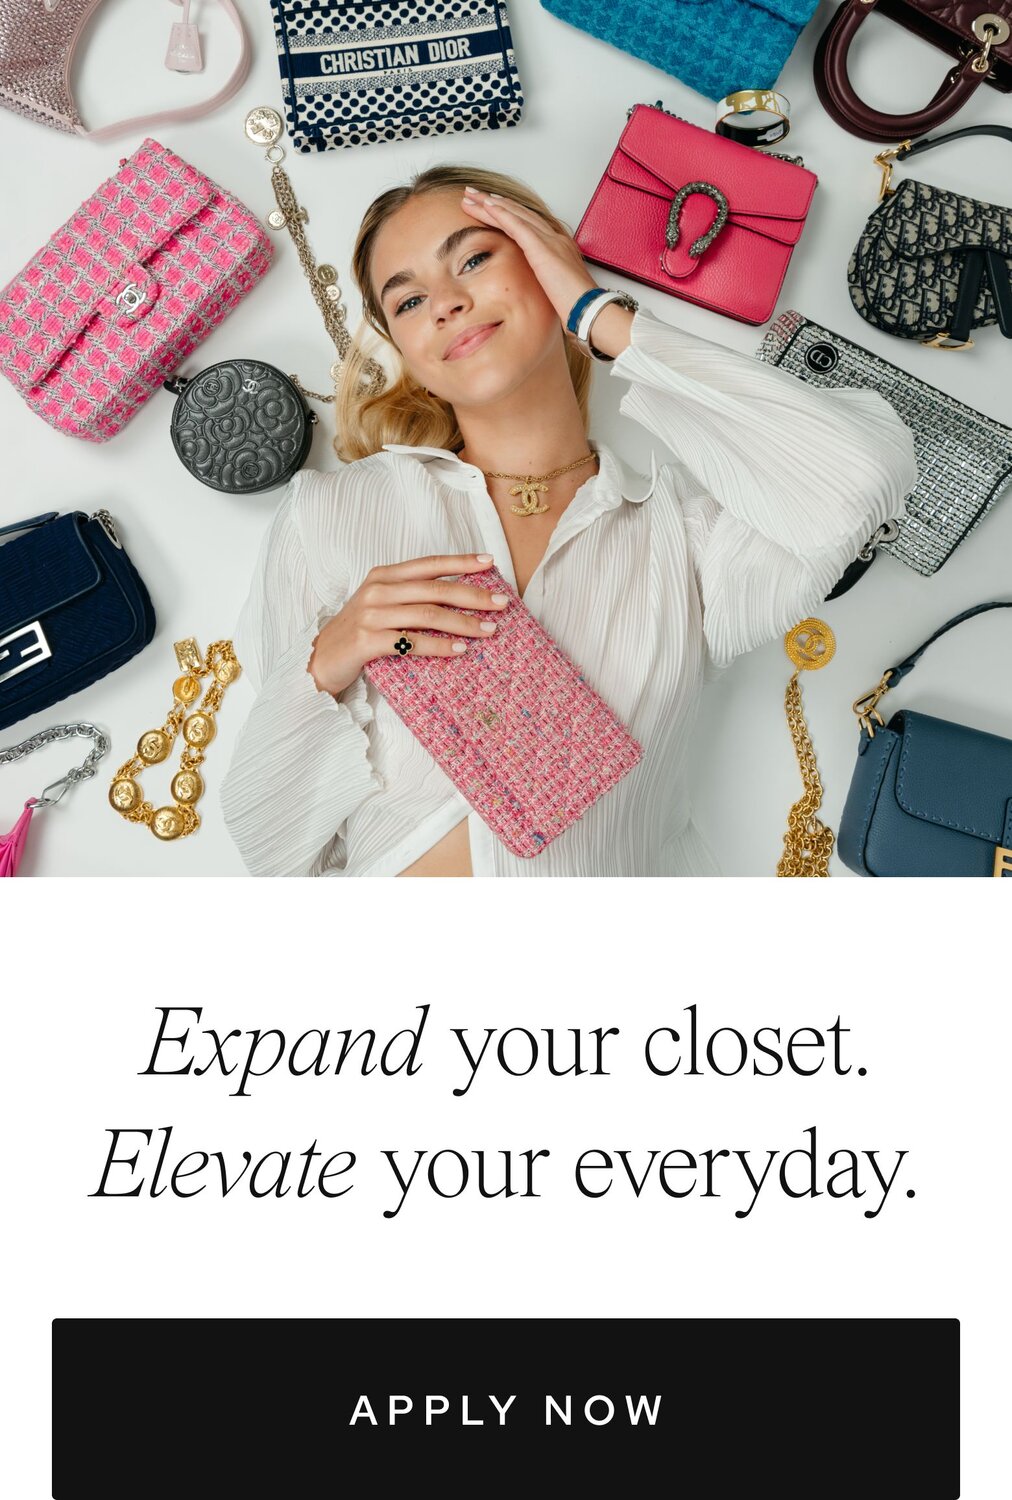 Photo of a woman laying down, smiling, clutching a pink luxury bag amidst a collection of chic luxury handbags and accessories from Vivrelle. Text below reads: "Expand your closet. Elevate your everyday." Button prompt: "Apply Now."